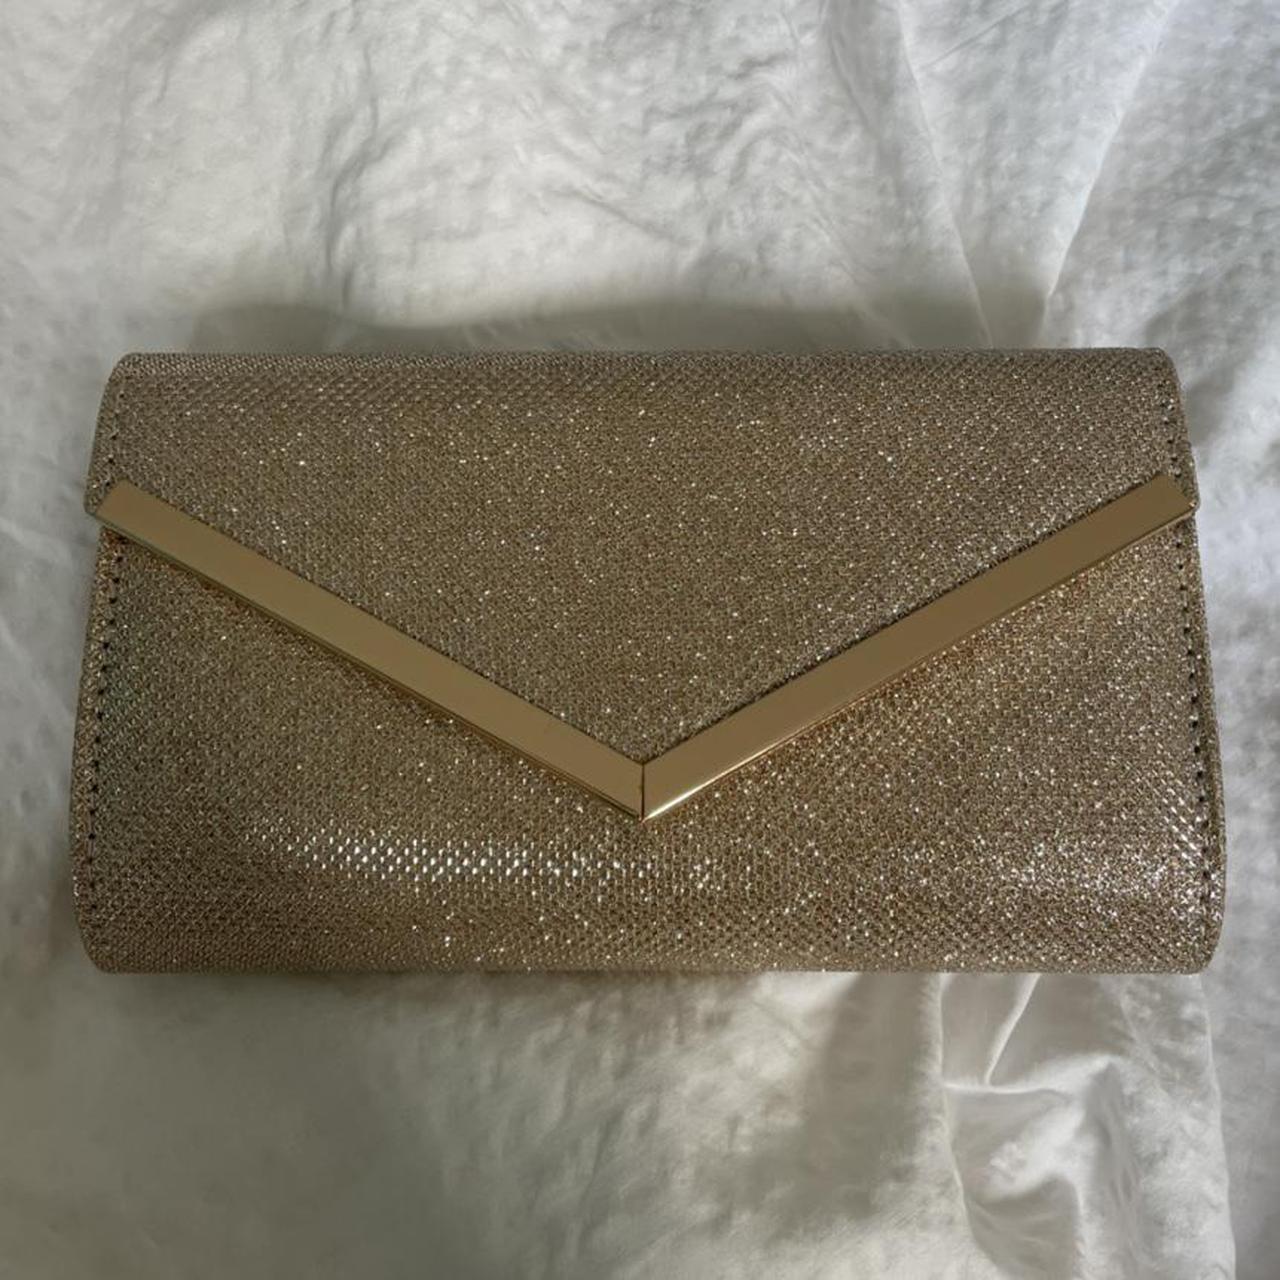 Colette formal gold clutch perfect for weddings,... - Depop